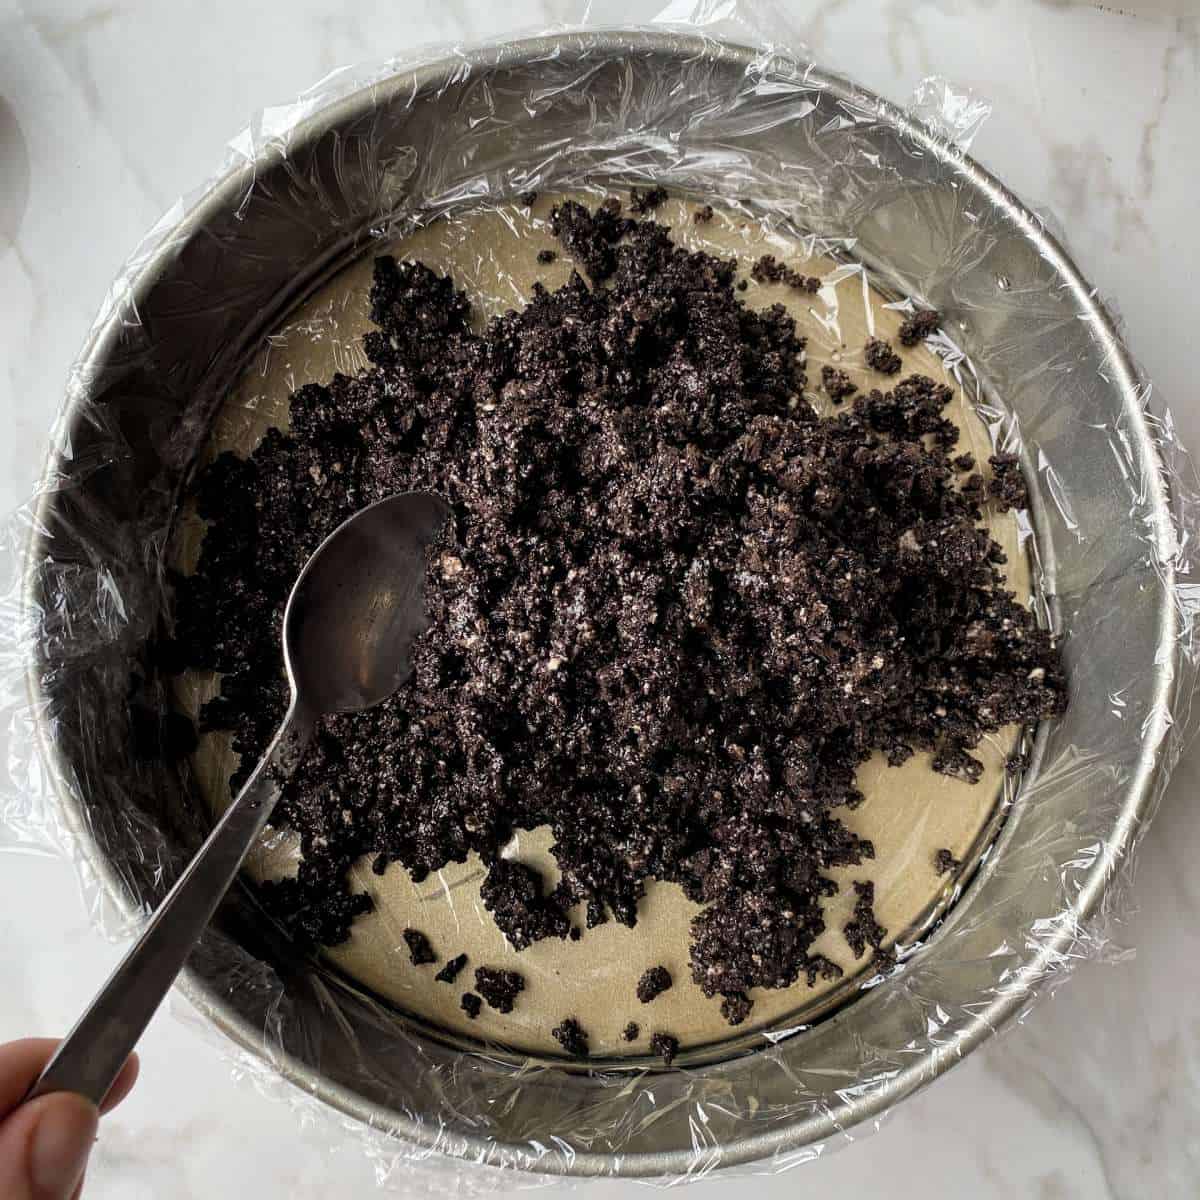 The oreo base for the top deck cheese cake being put into a lined cake tin